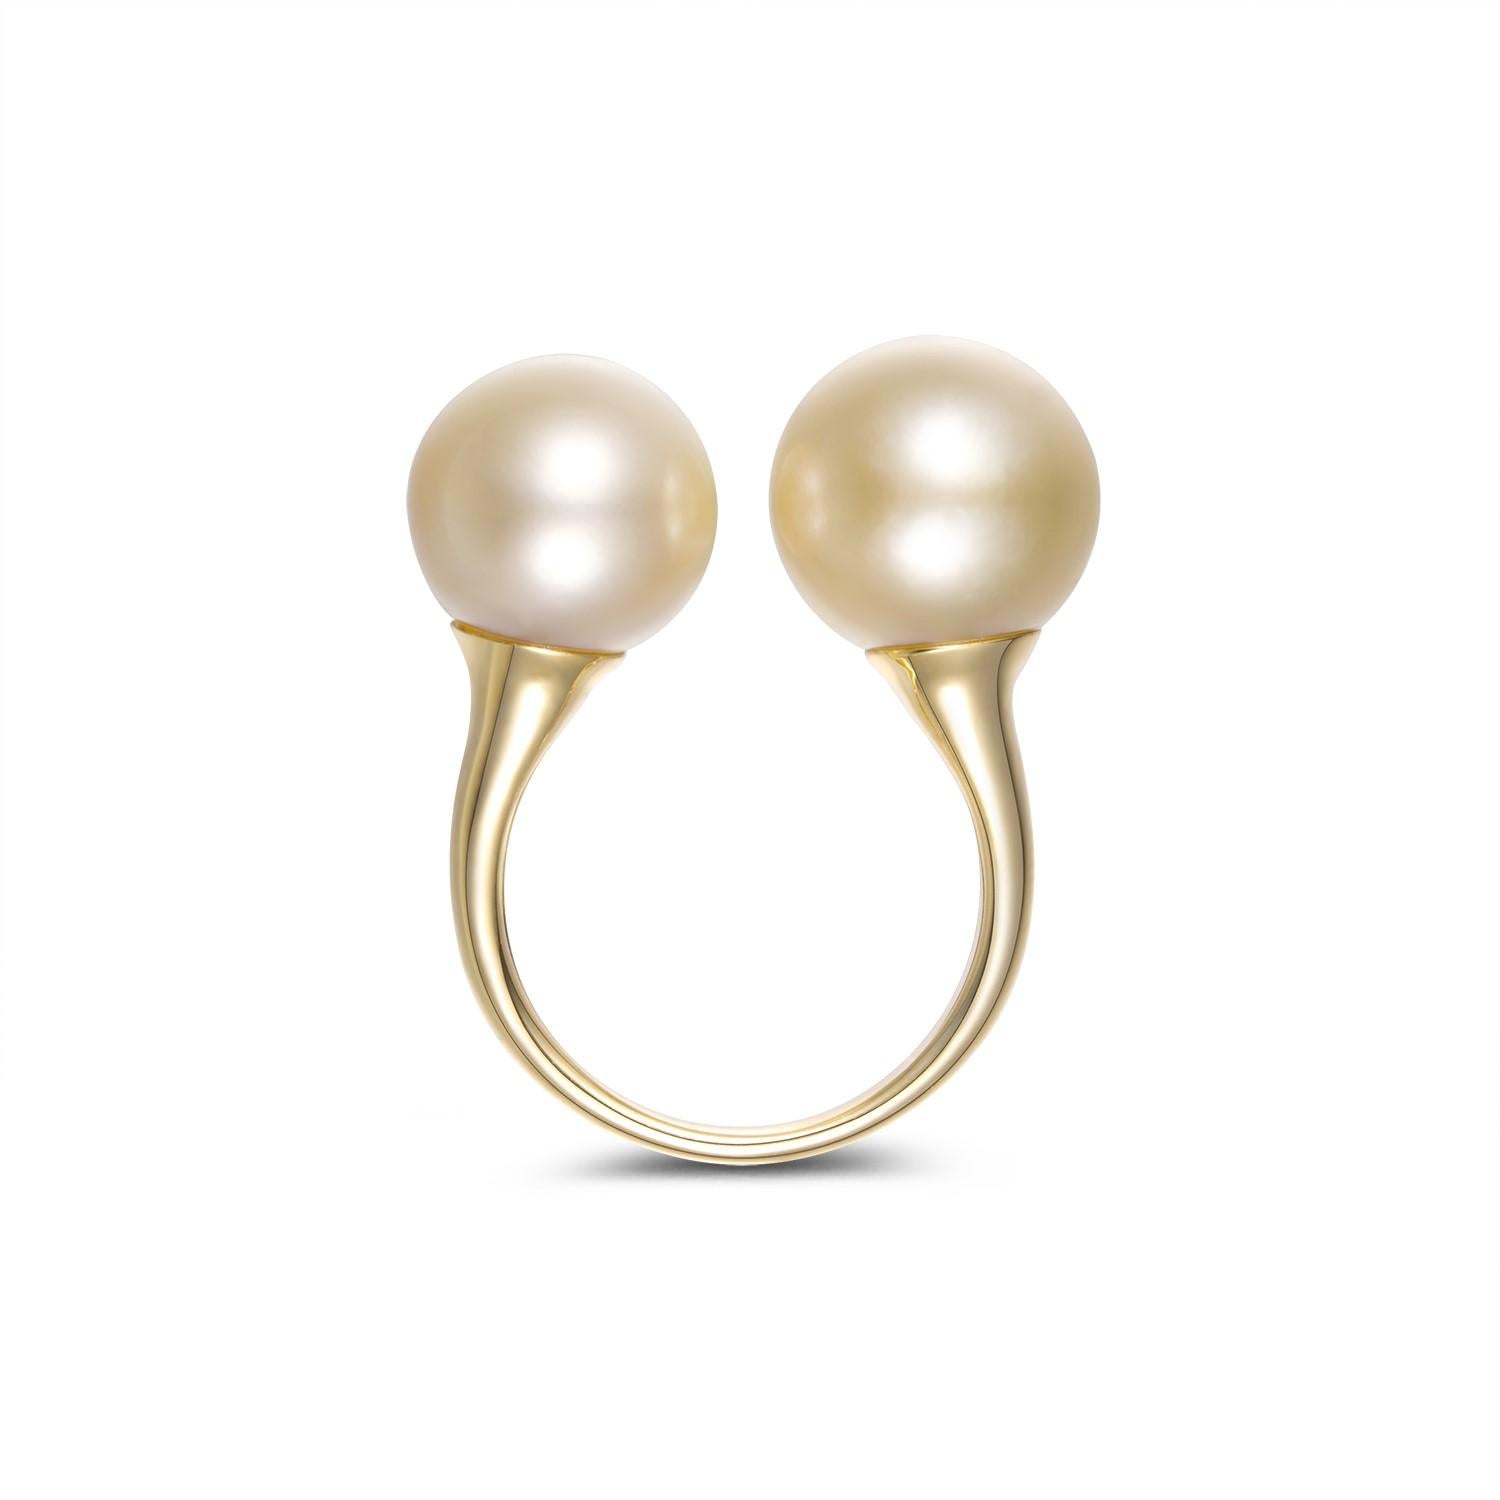 Introducing our breathtaking Champagne South Sea Pearl Ring, an epitome of elegance and sophistication. This exquisite ring showcases two champagne-colored South Sea pearls, ranging in size from 10.8mm to 11.5mm, exuding timeless beauty and